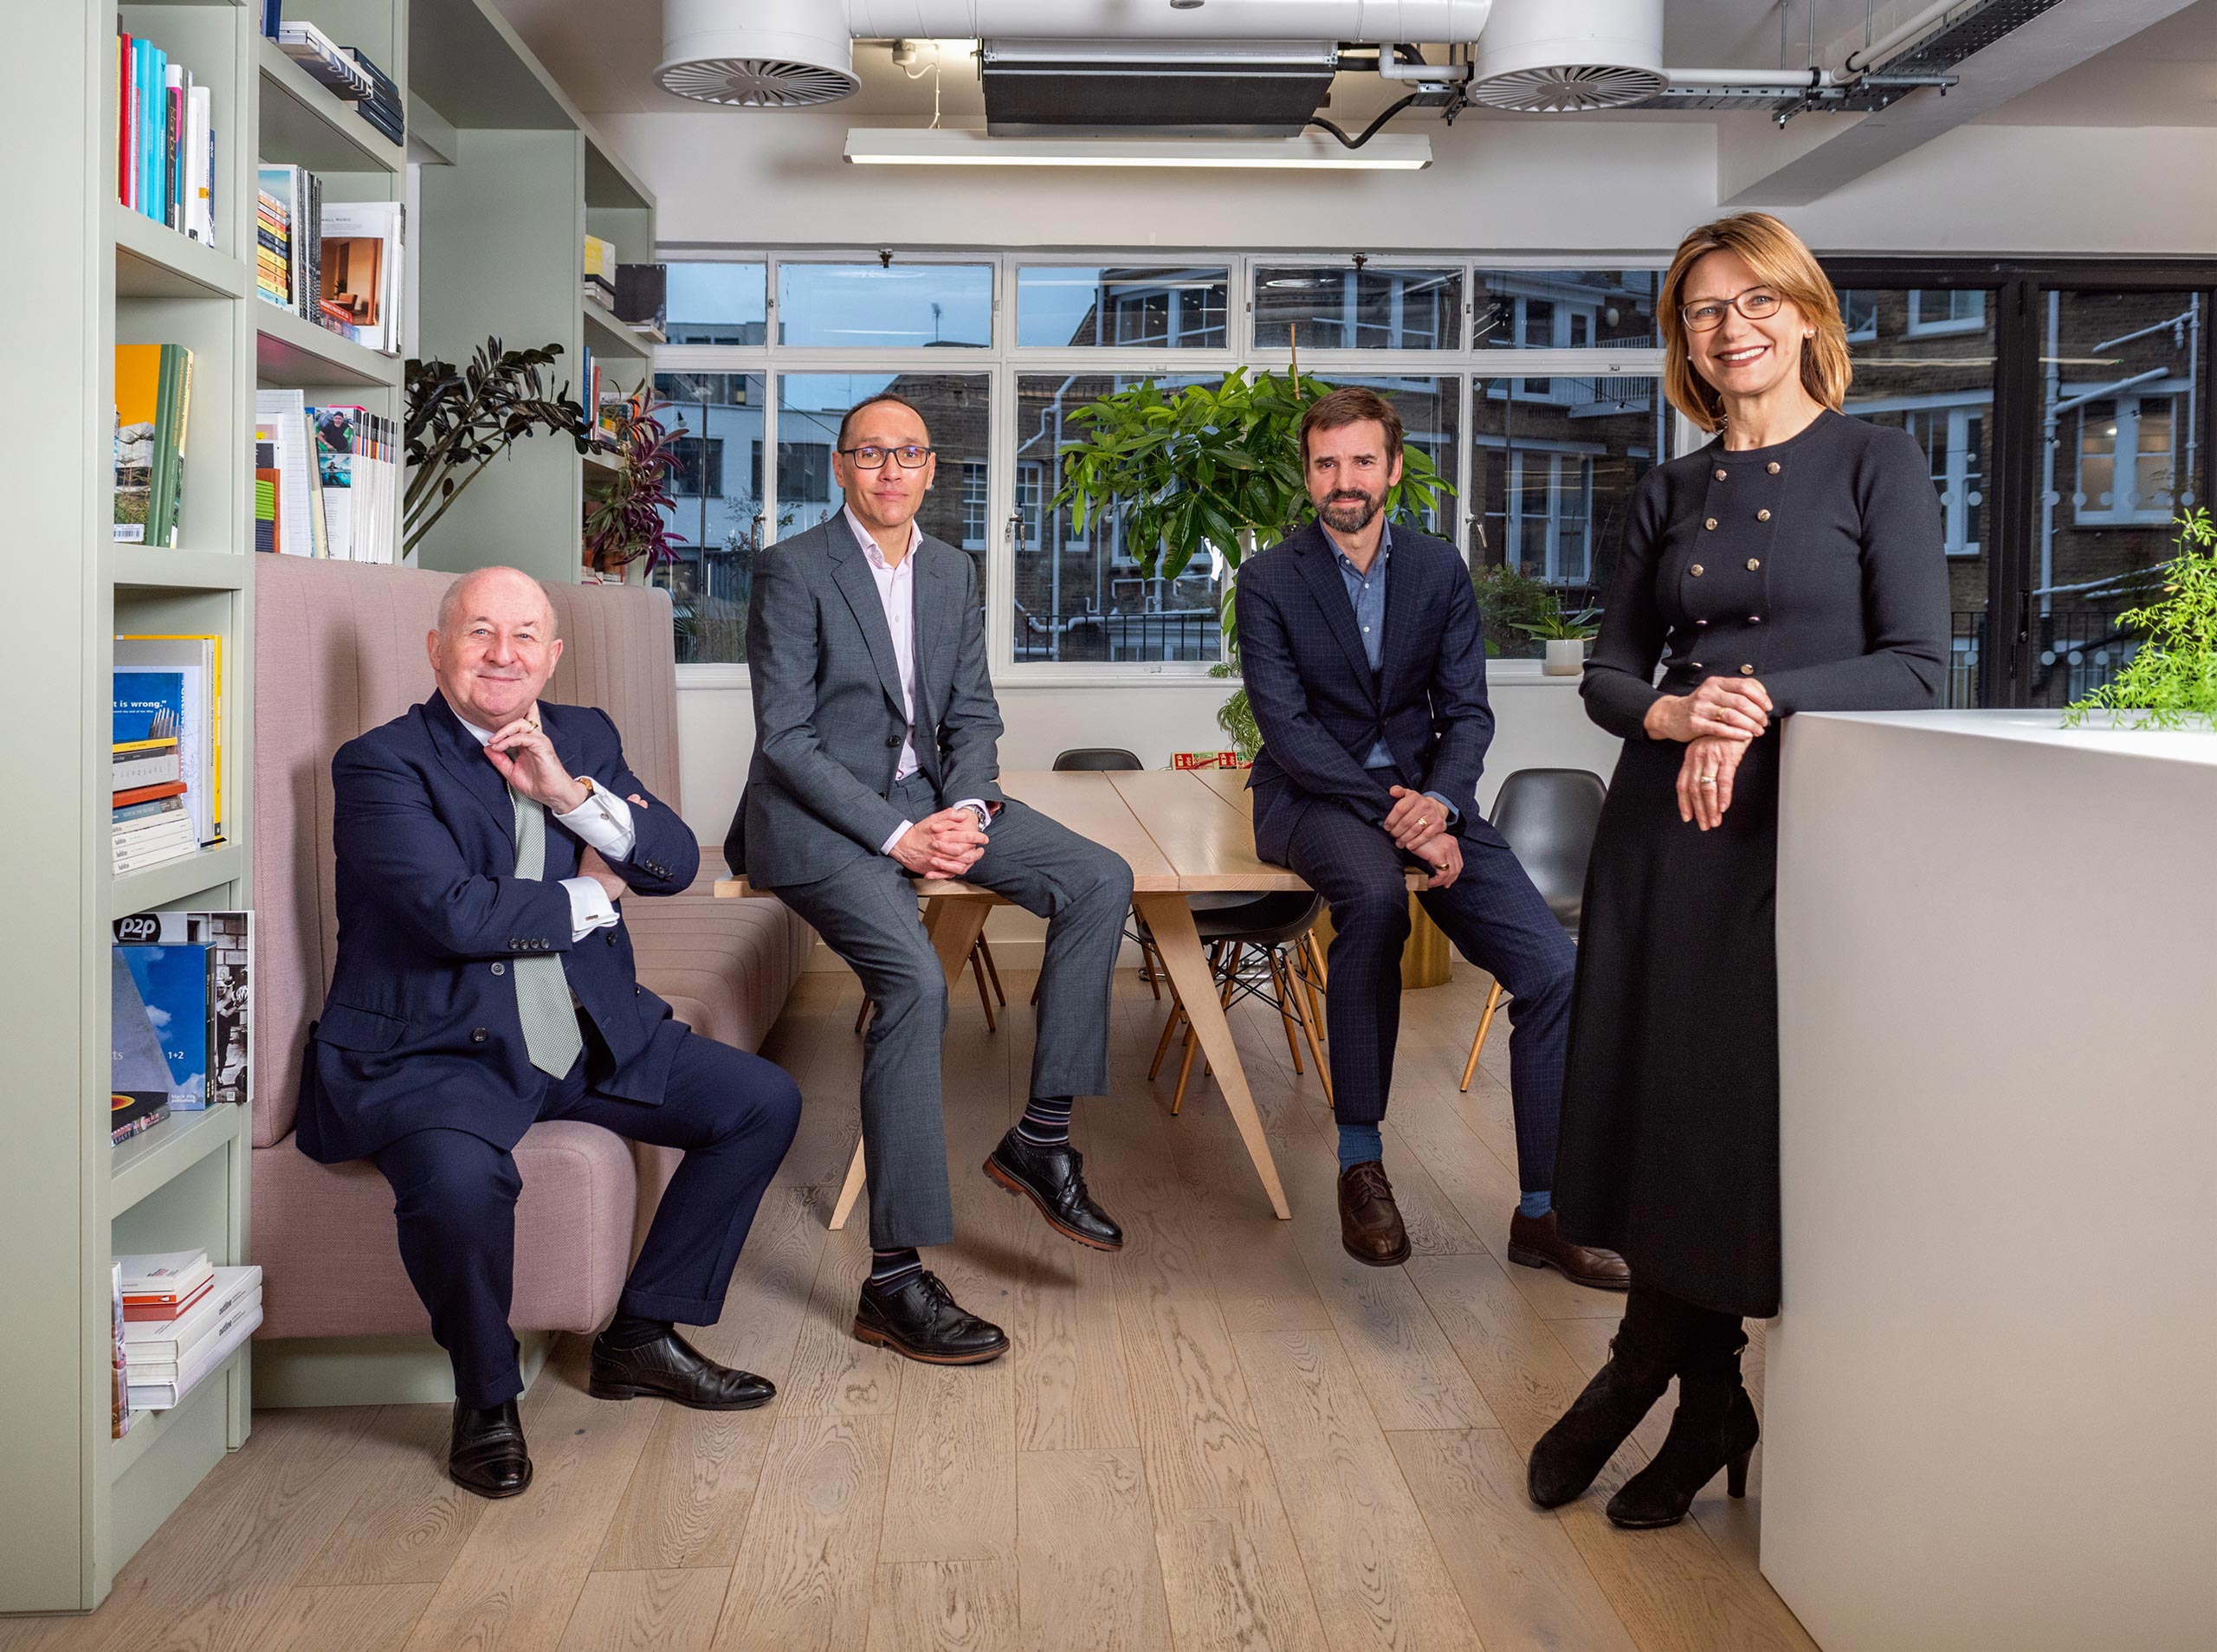 A group shot of four senior professionals standing and sitting in their London offices, casual yet formal.